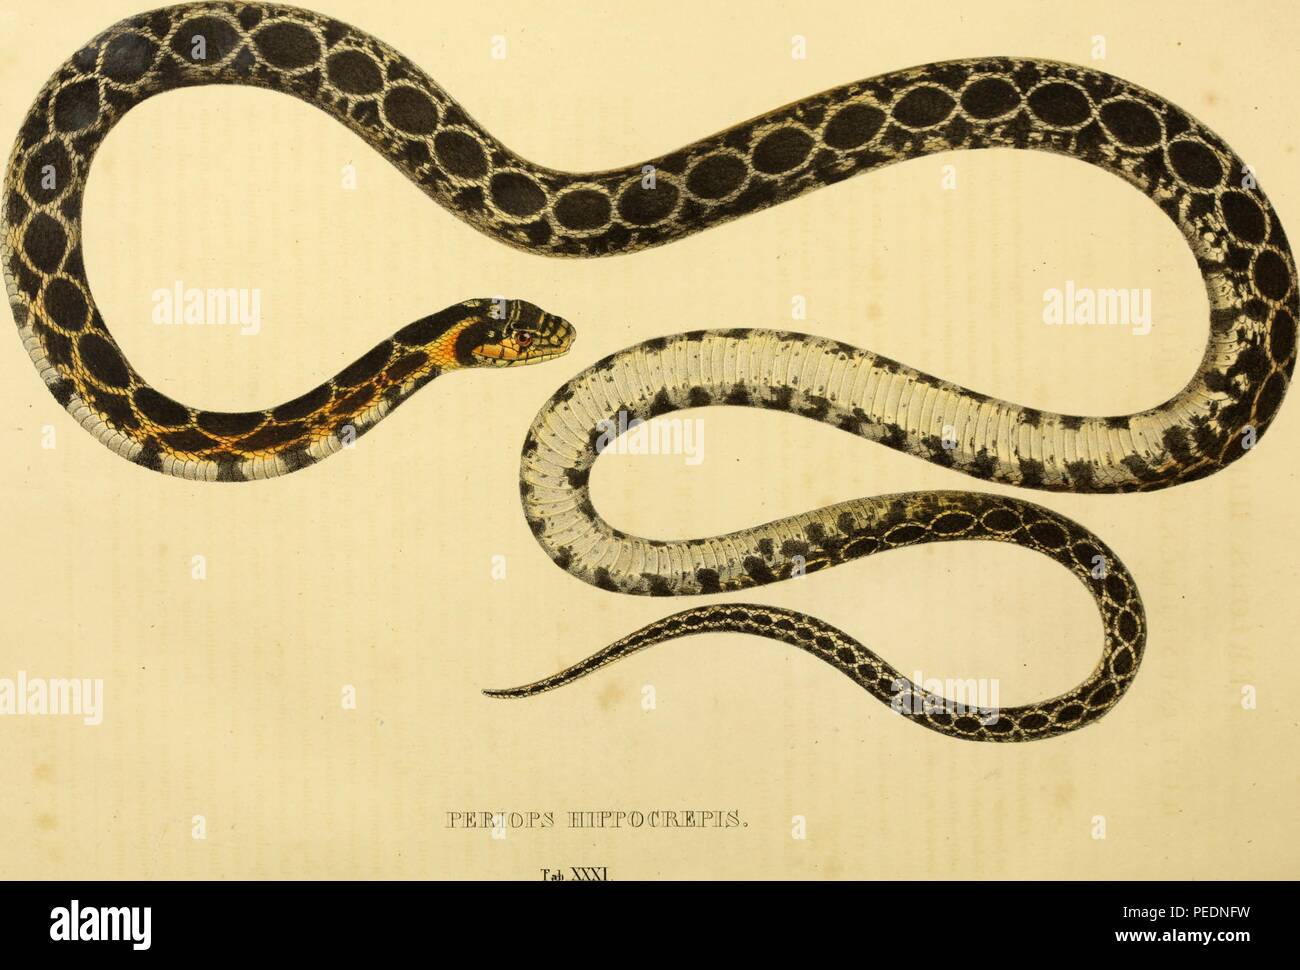 Color print depicting a snake with black, cream, grey, and orange markings, captioned 'Periops Hippocrepis, ' but commonly known as the horseshoe whip snake (Hemorrhois hippocrepis) a species in the family Colubridae which is native to northern Africa and southwestern Europe, 1828. Courtesy Internet Archive. () Stock Photo